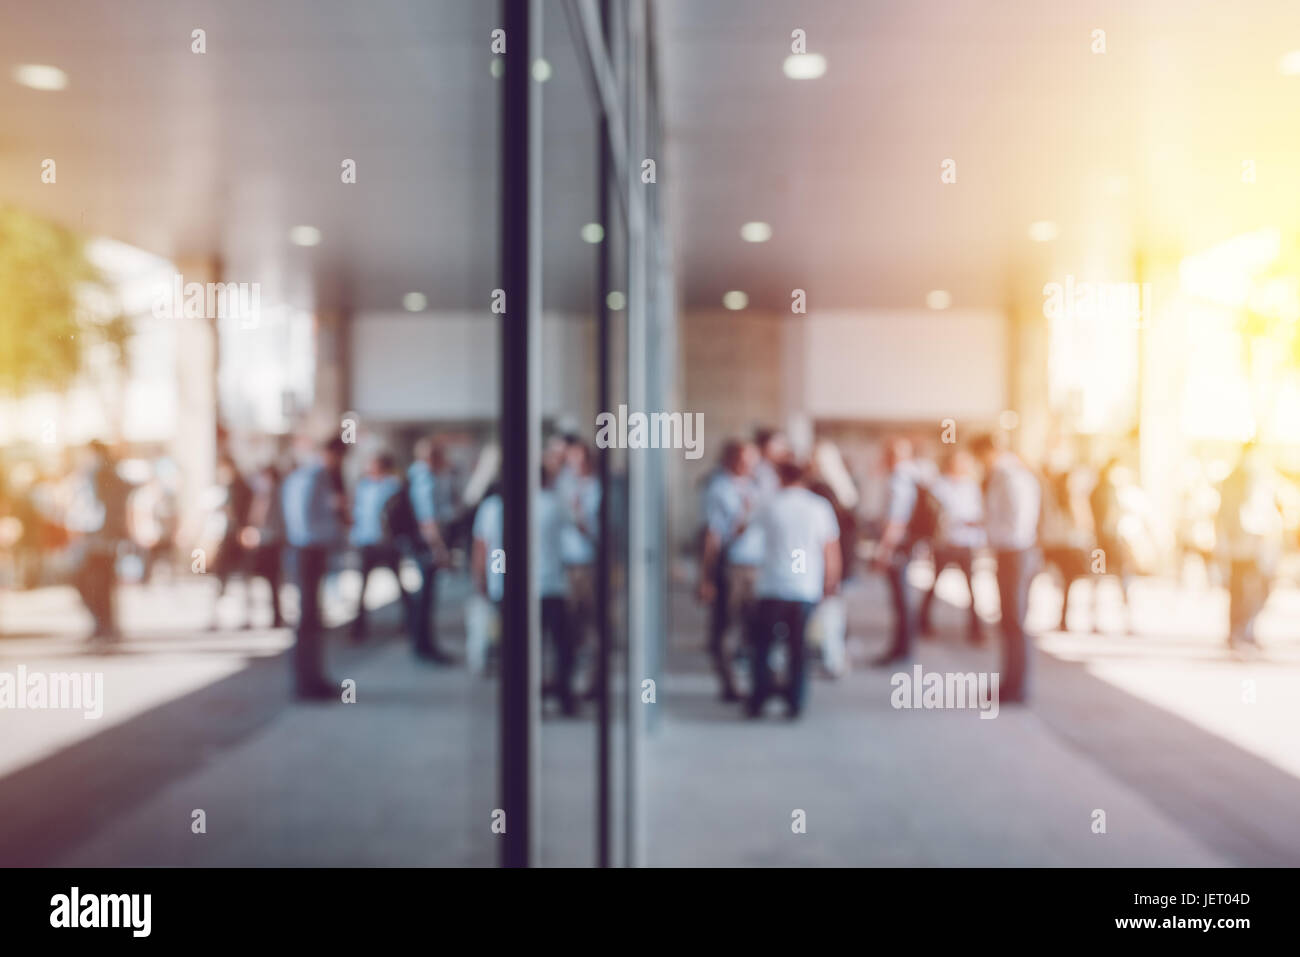 Abstract blur business and entrepreneurship background, unrecognizable crowd of businesspeople in front of corporate premises Stock Photo